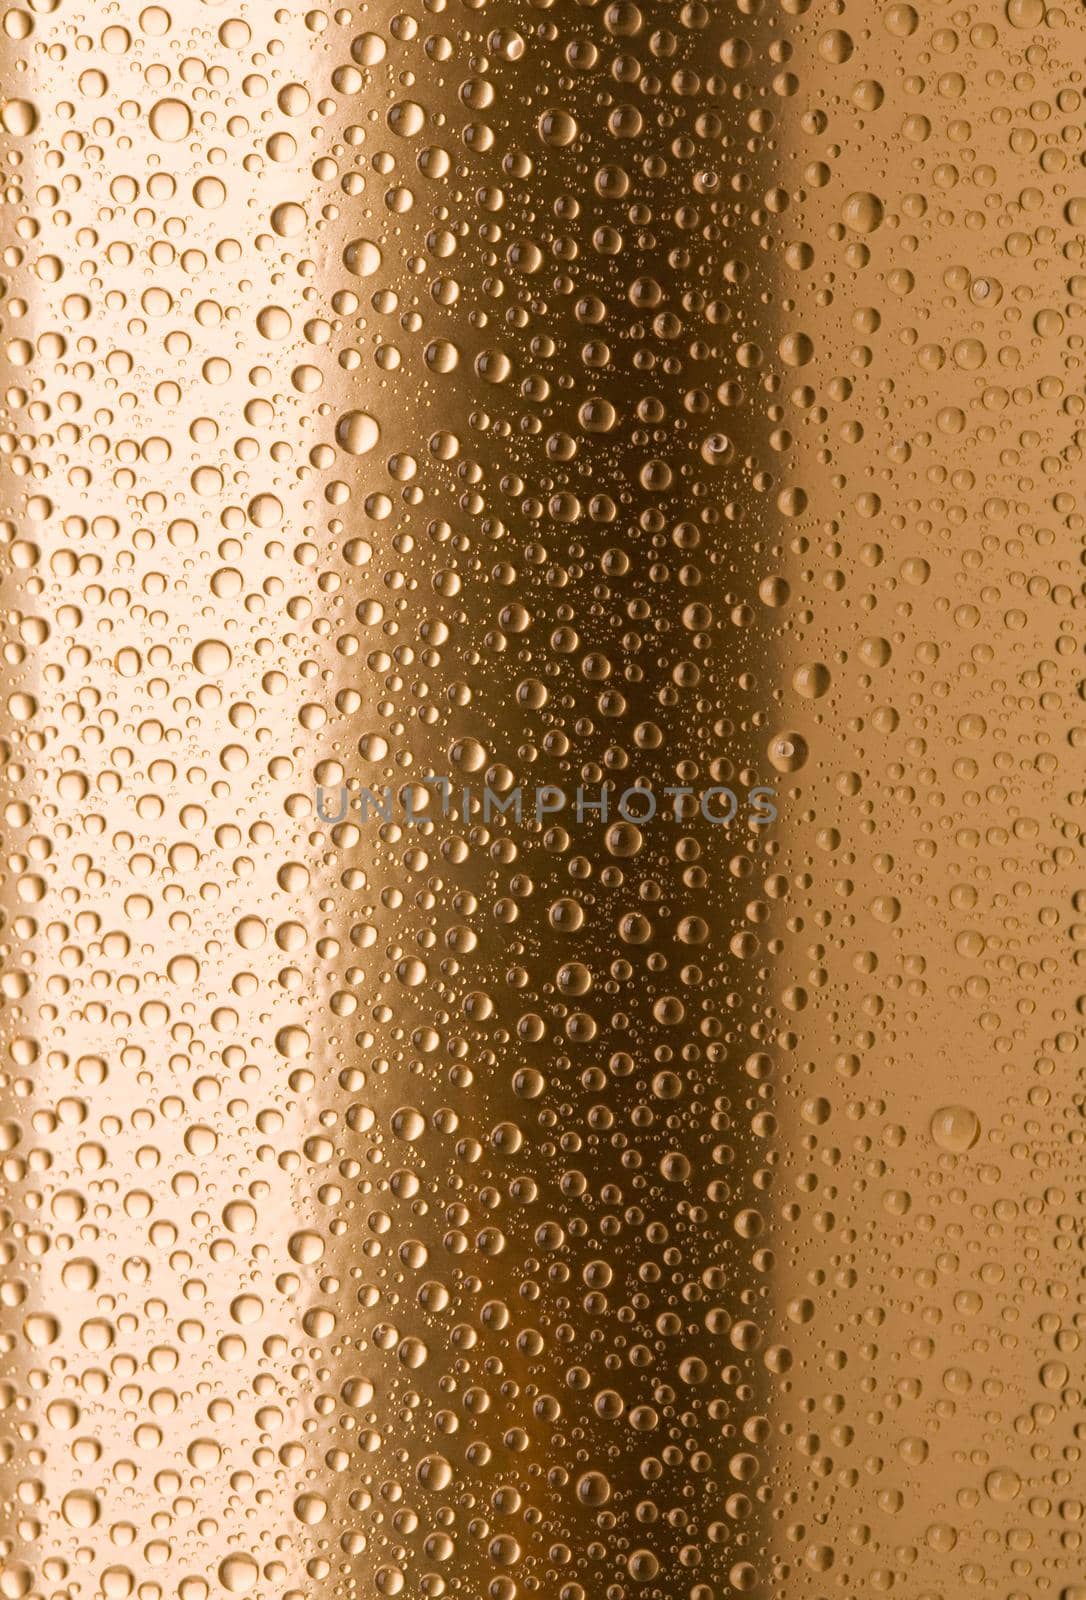 Abstract macro of water drops over yellow background